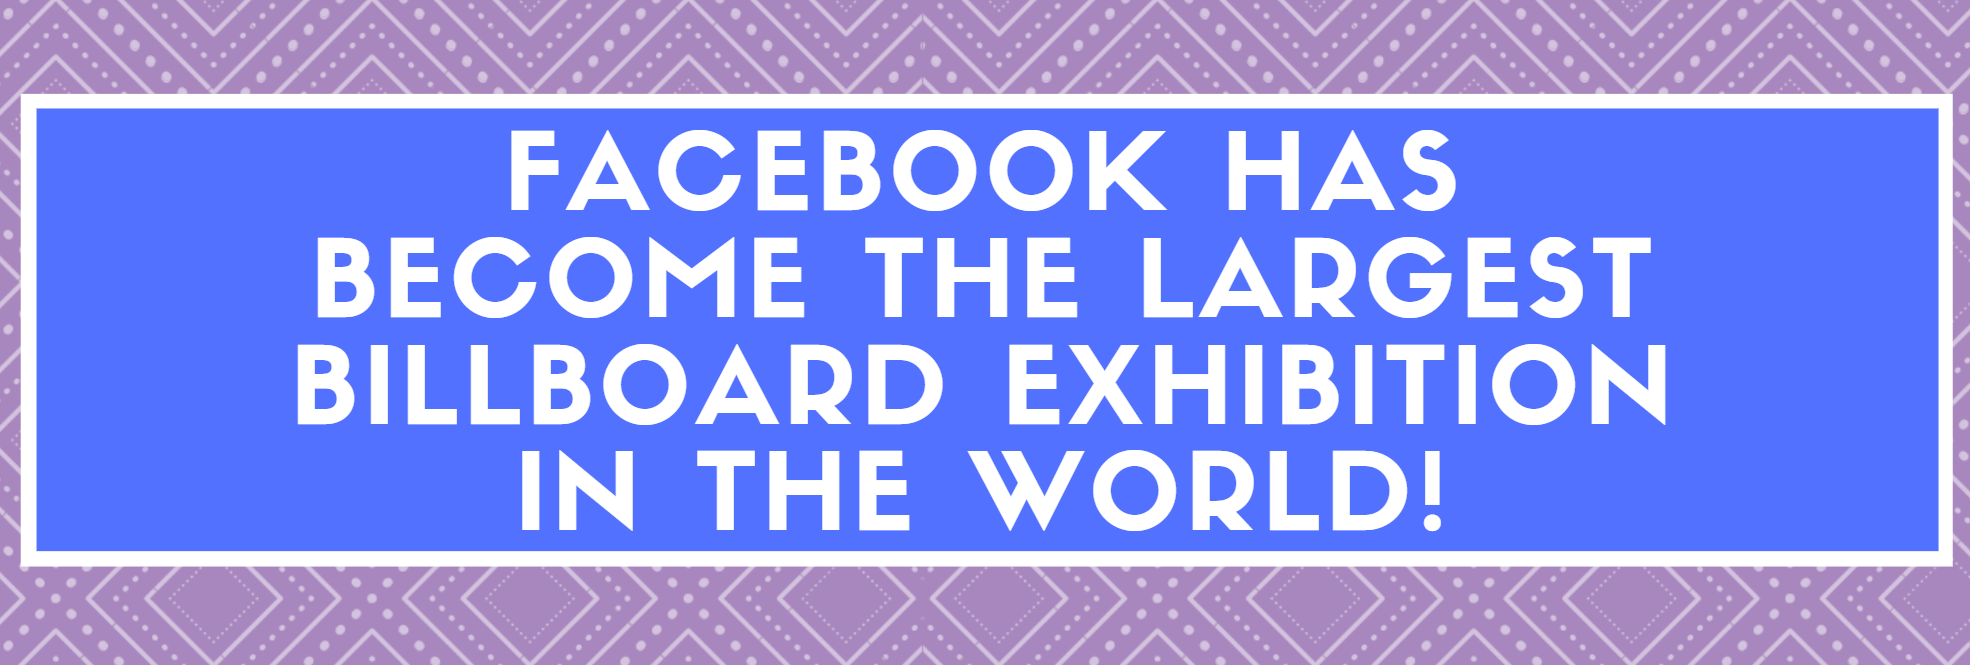 Facebook the largest billboard exhibition in the world